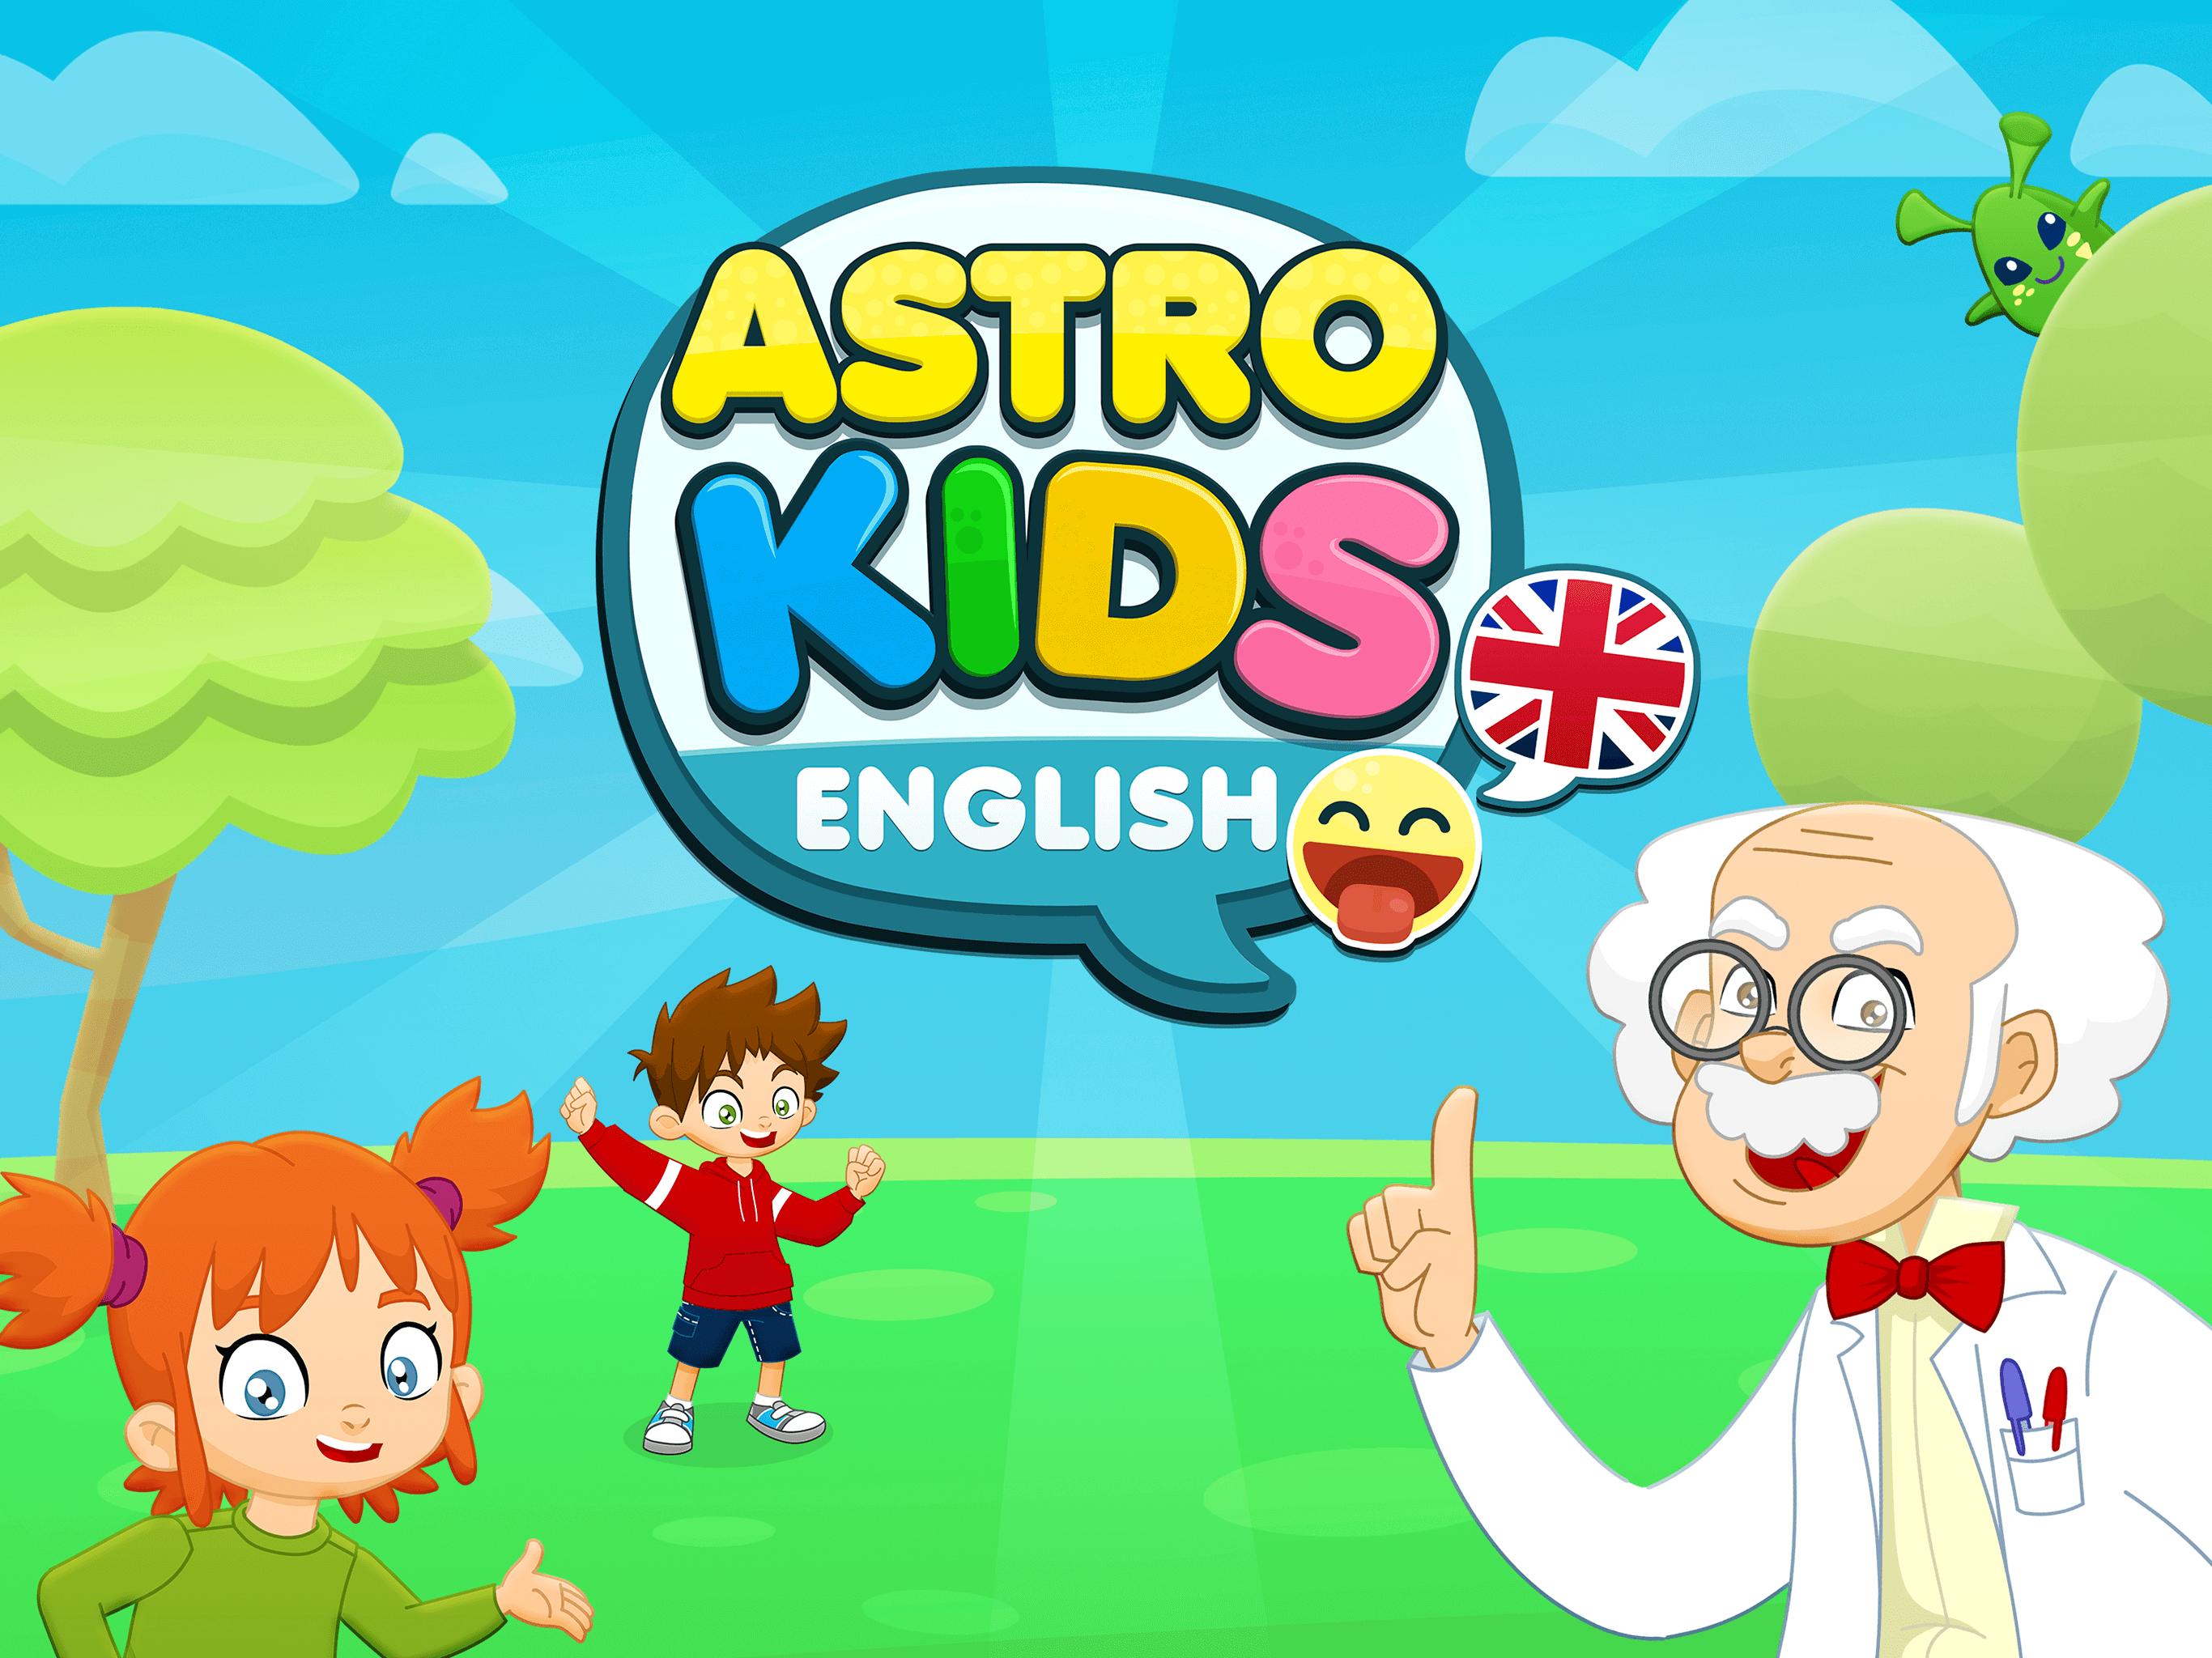 https://play.google.com/store/apps/details?id=com.iterationkids.astrokids_english_for_kids